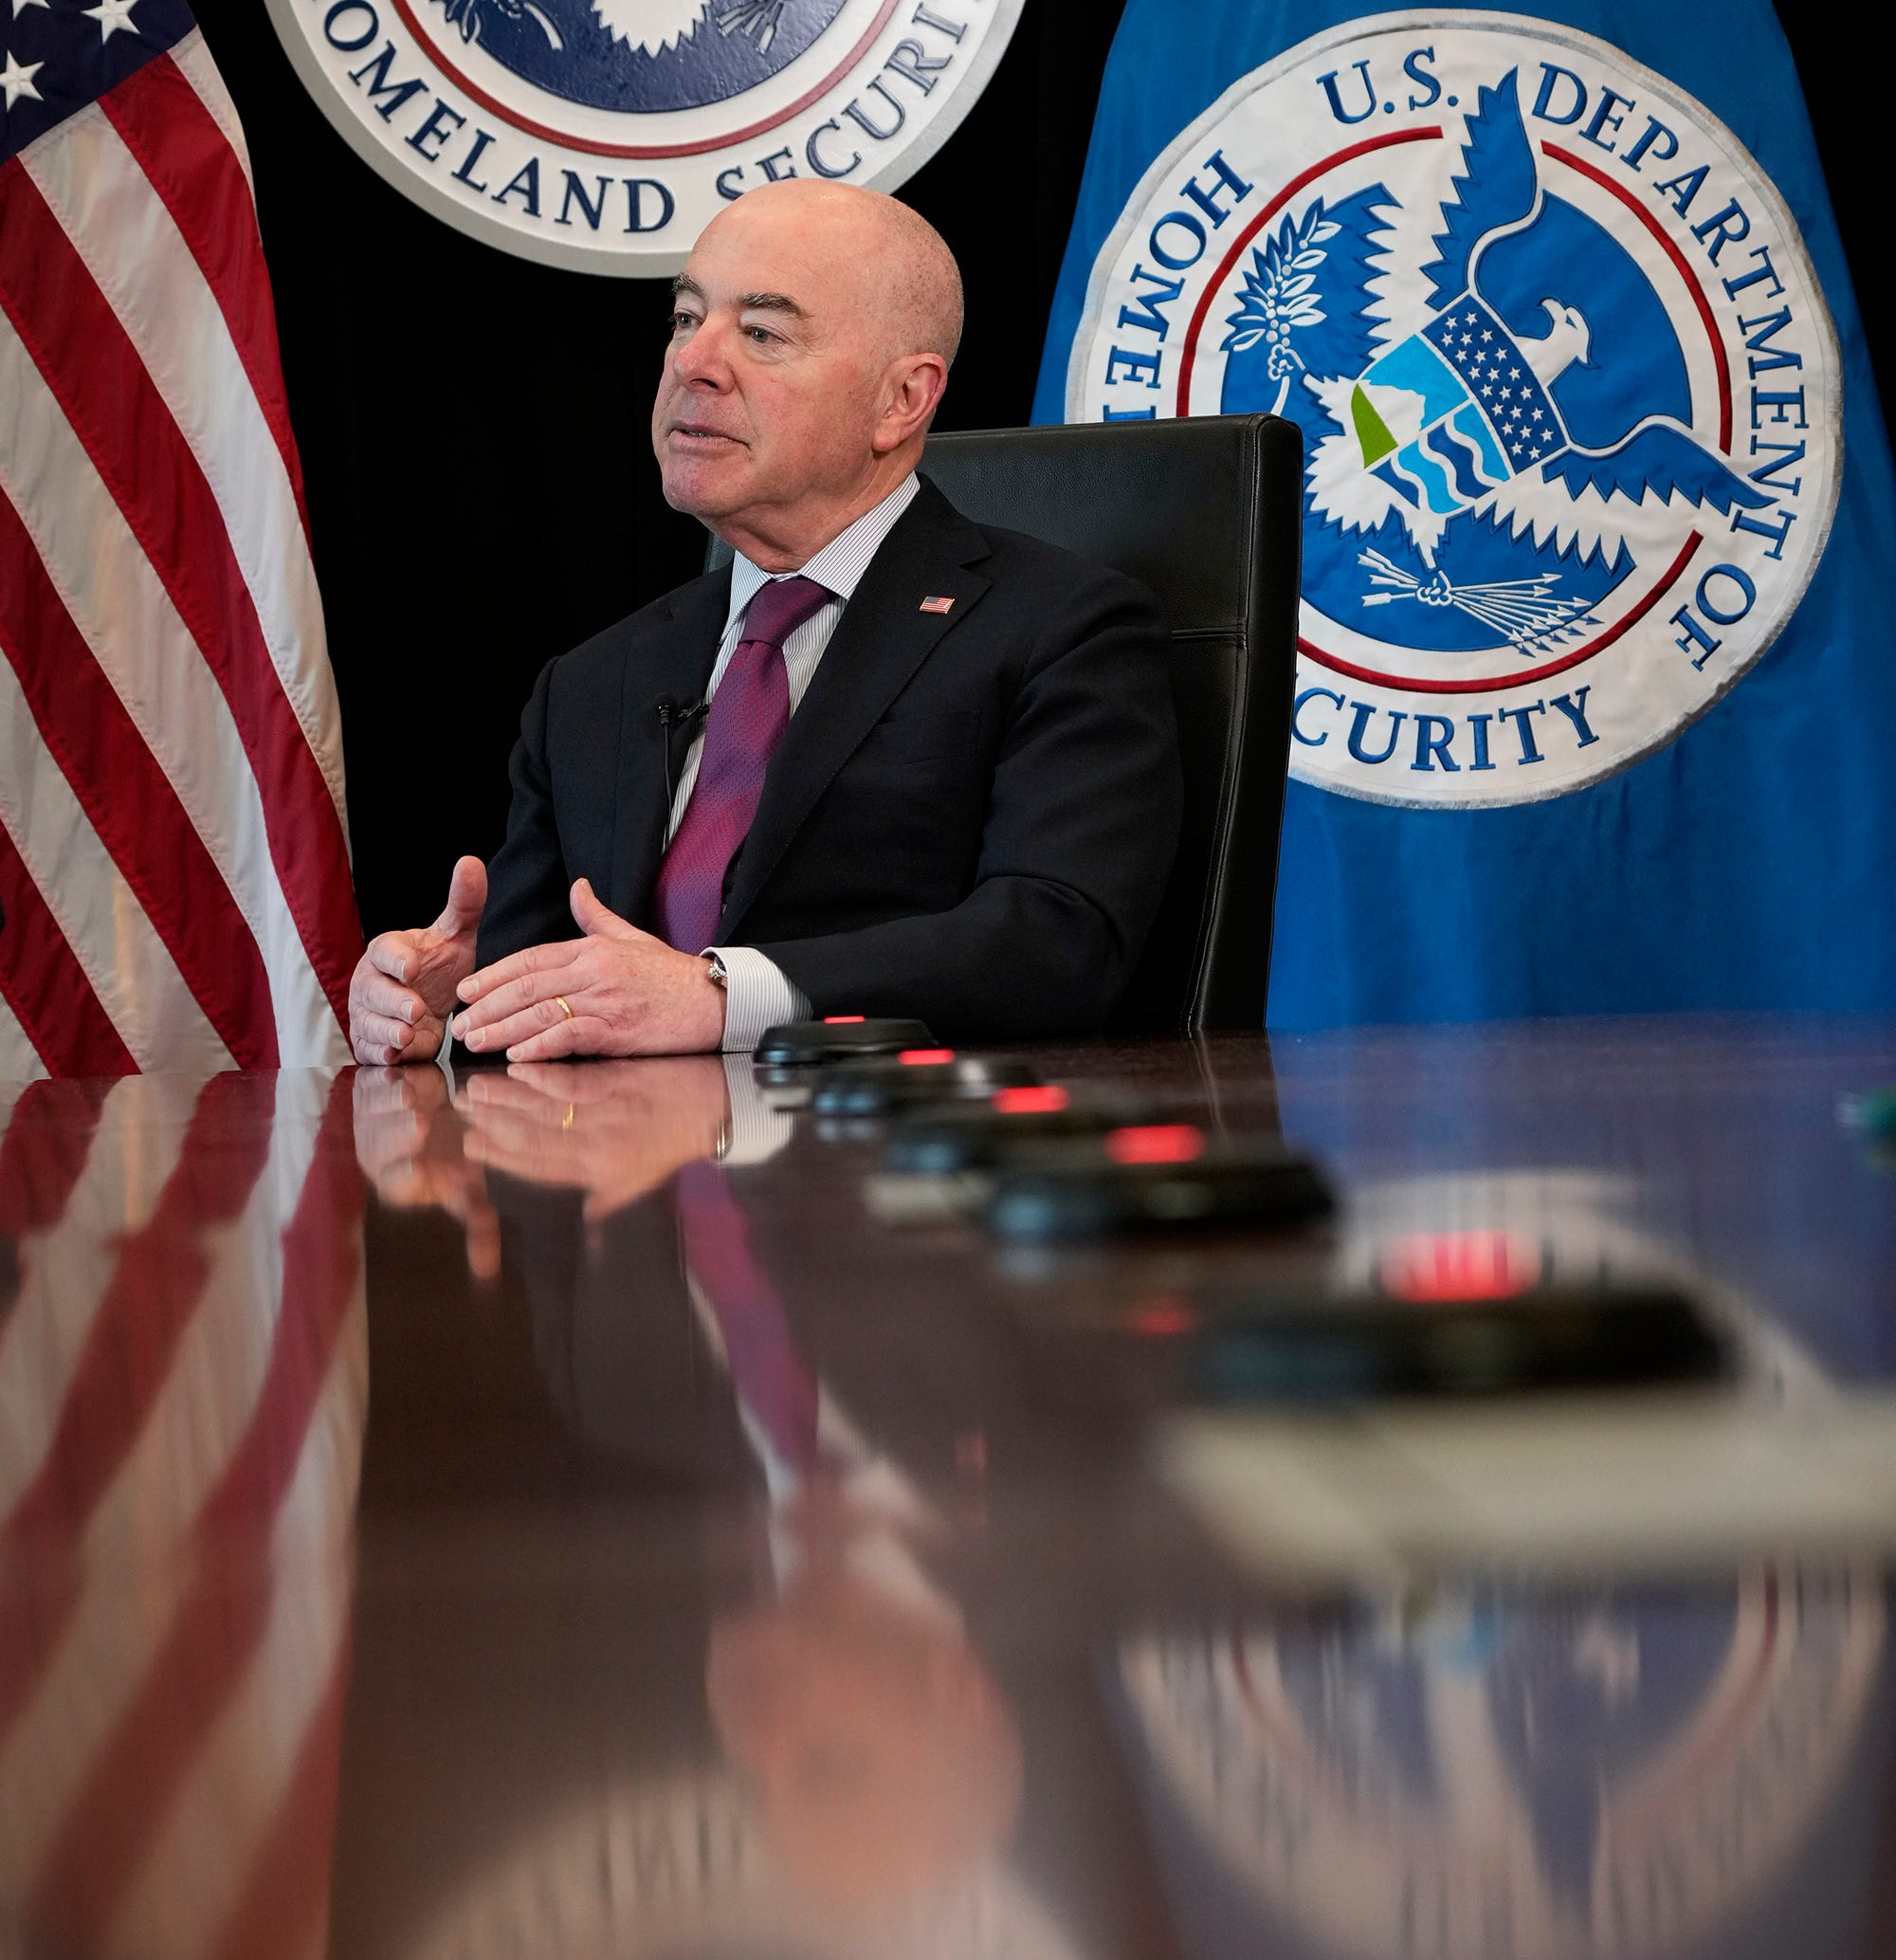 exclusive: homeland security ramping up 'with intensity' to respond to election threats